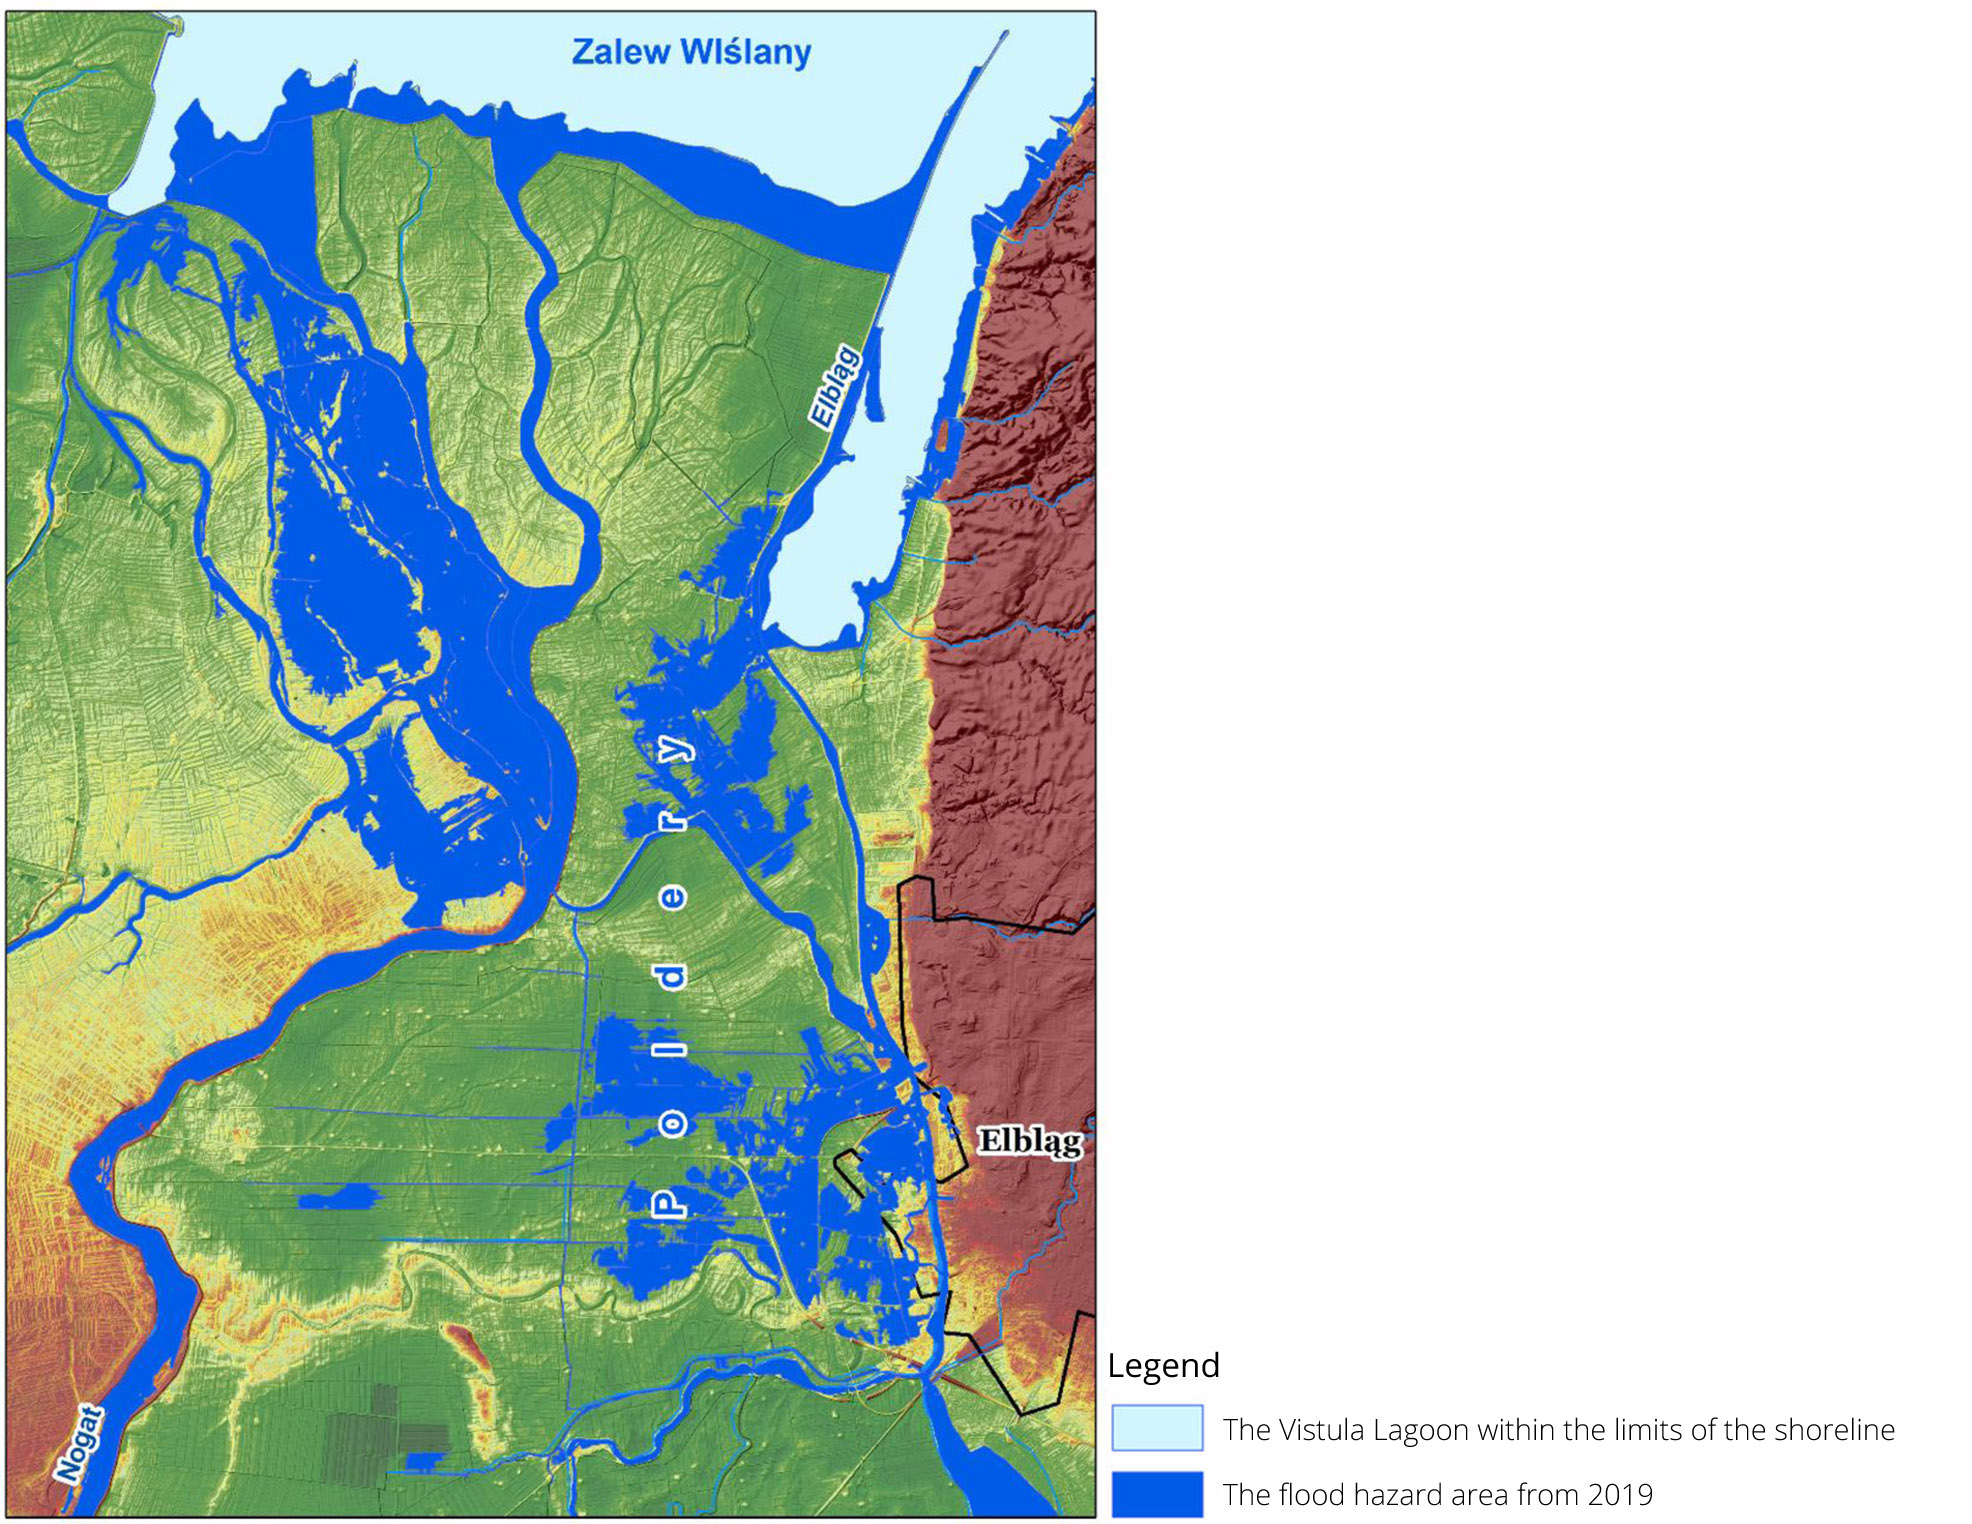 Flood hazard extent p = 1% from the Vistula Lagoon by the methodology from 2019. The flood hazard area was approximately 28.2 km2.